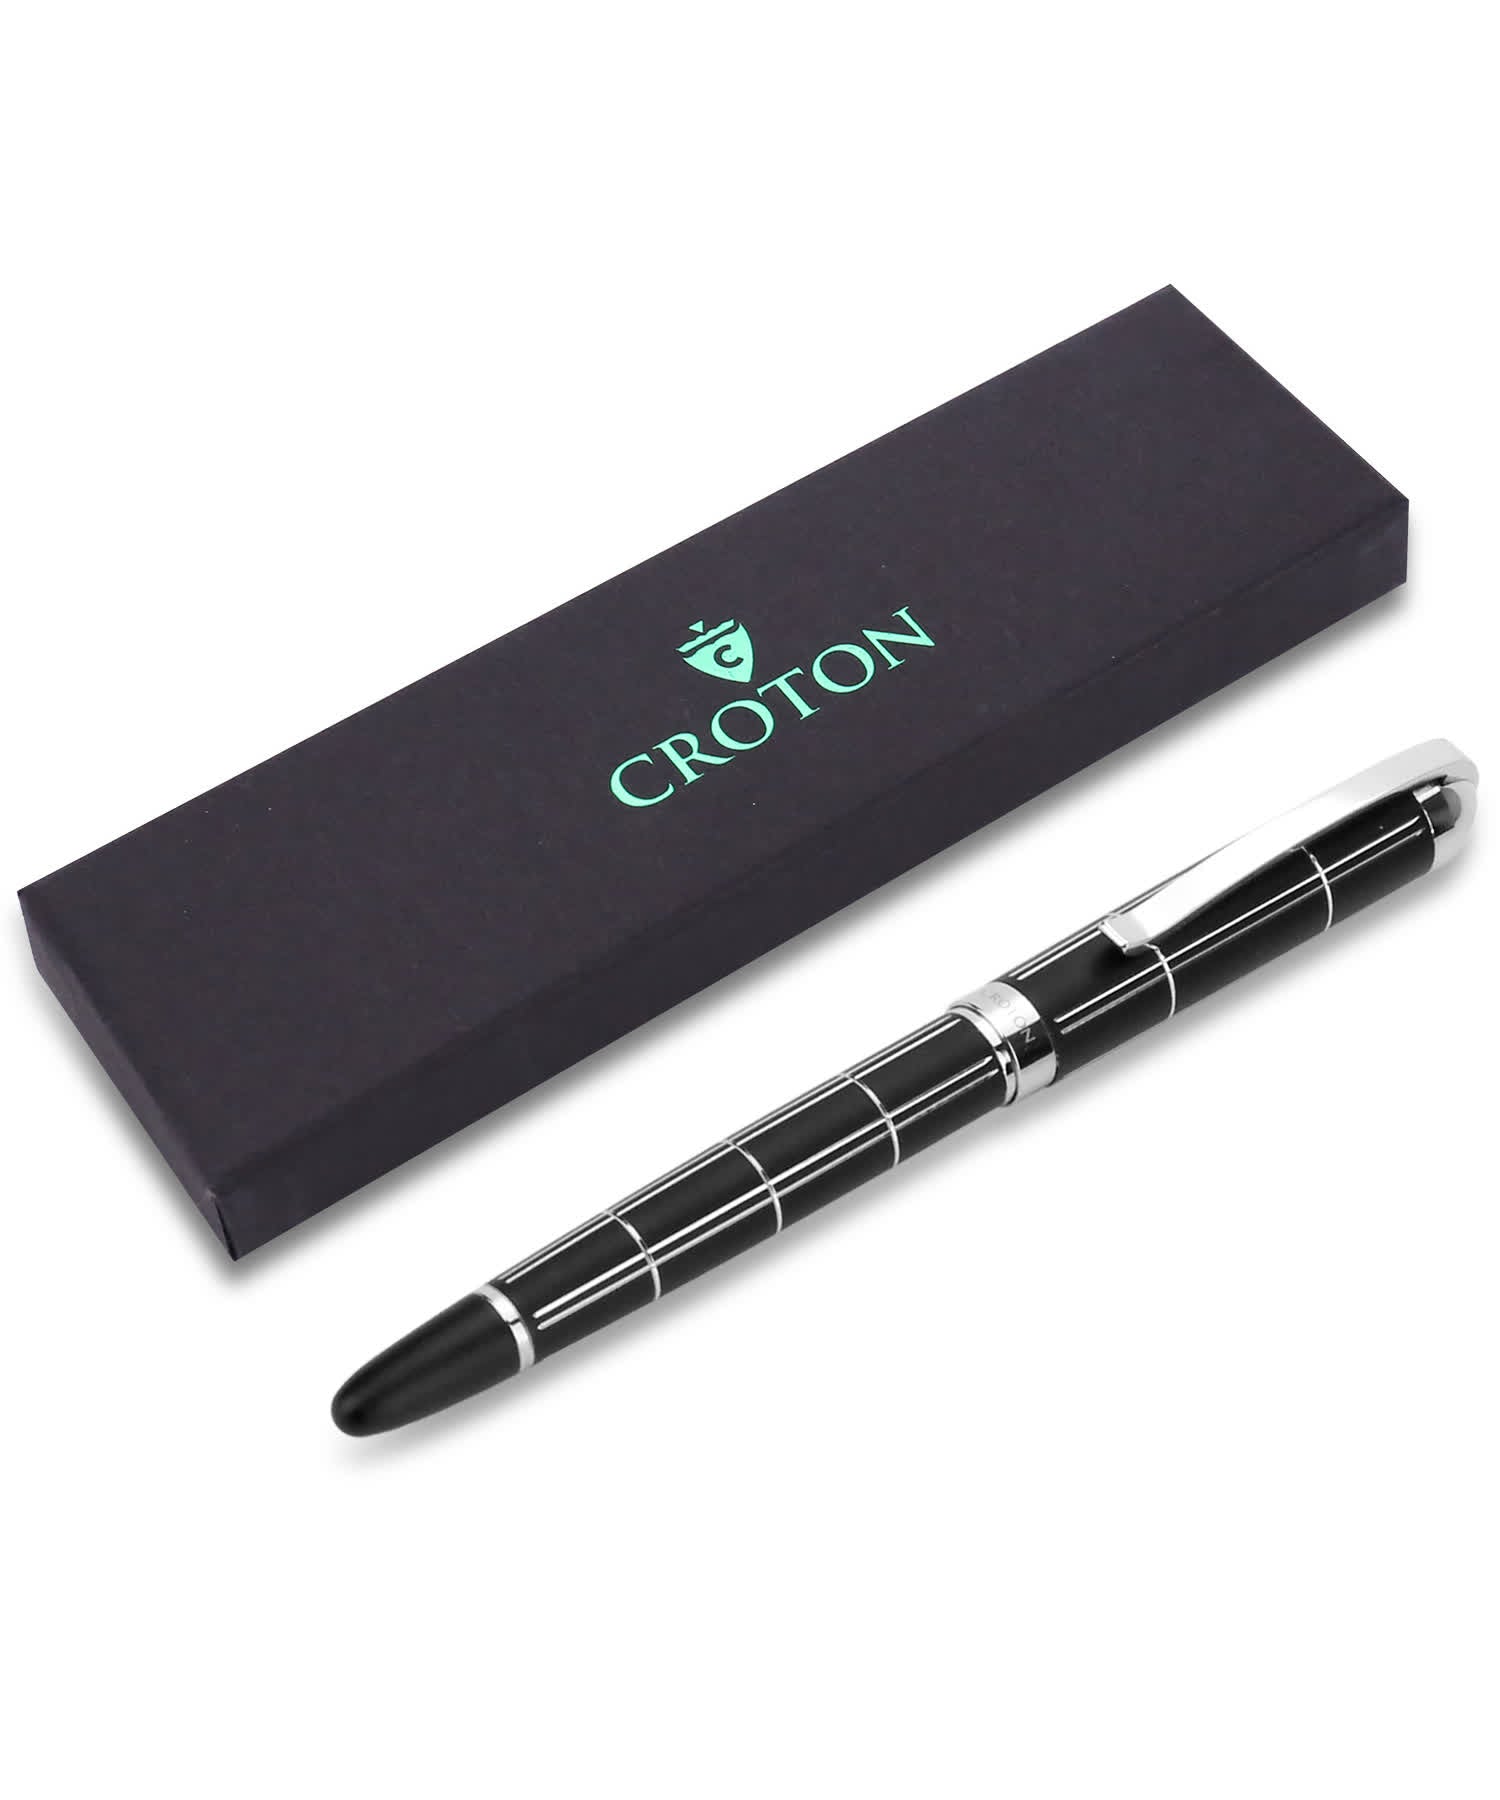 Croton Ballpoint Pen With Laser Cut Grooves In Matte Black and Chrome Accents View 4